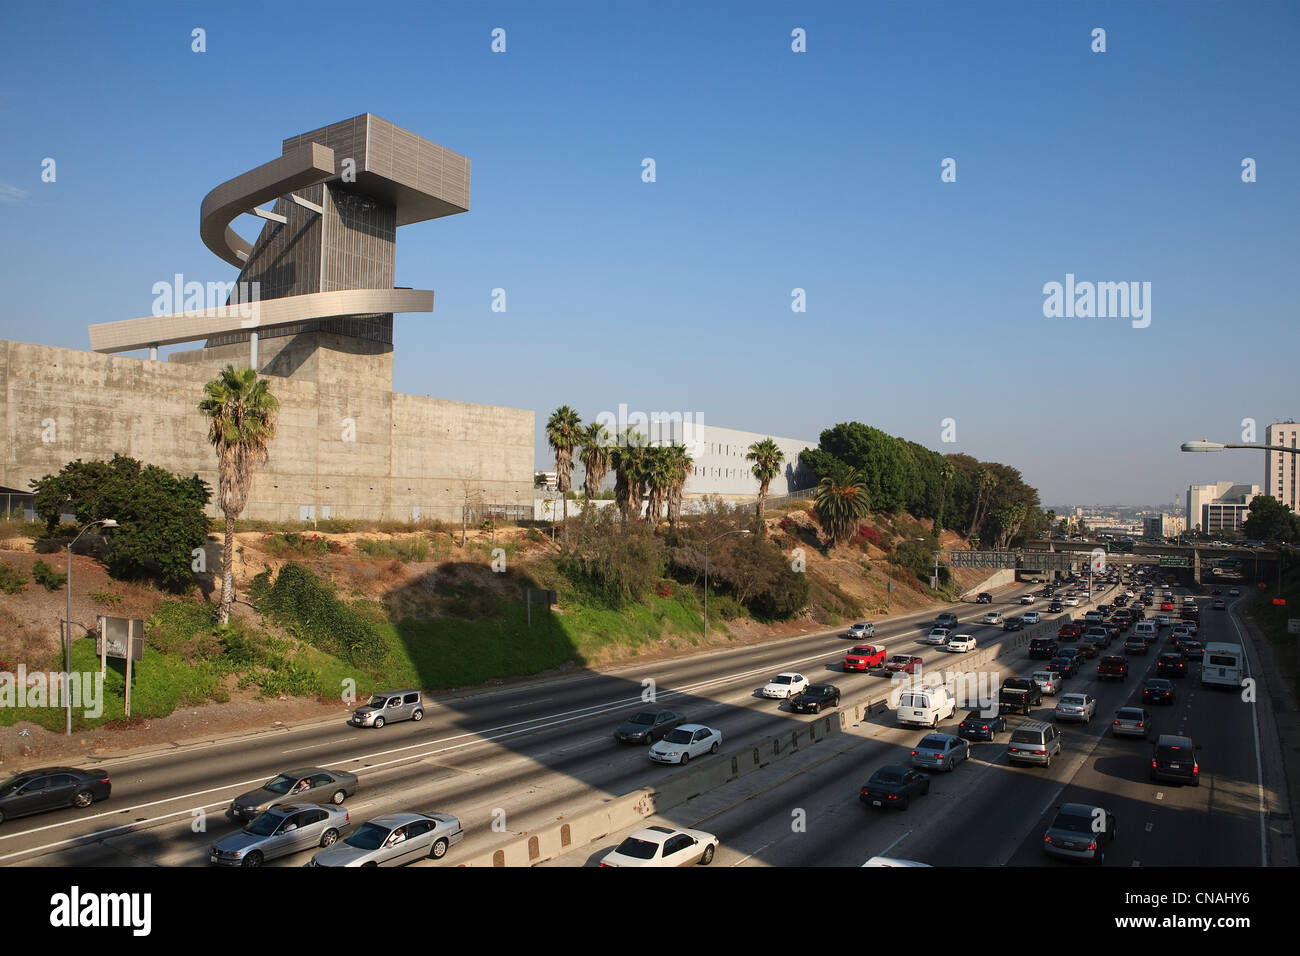 United States, California, Los Angeles, Ramon C. Cortines School of Visual and Performing Arts and Hollywood Freeway Stock Photo